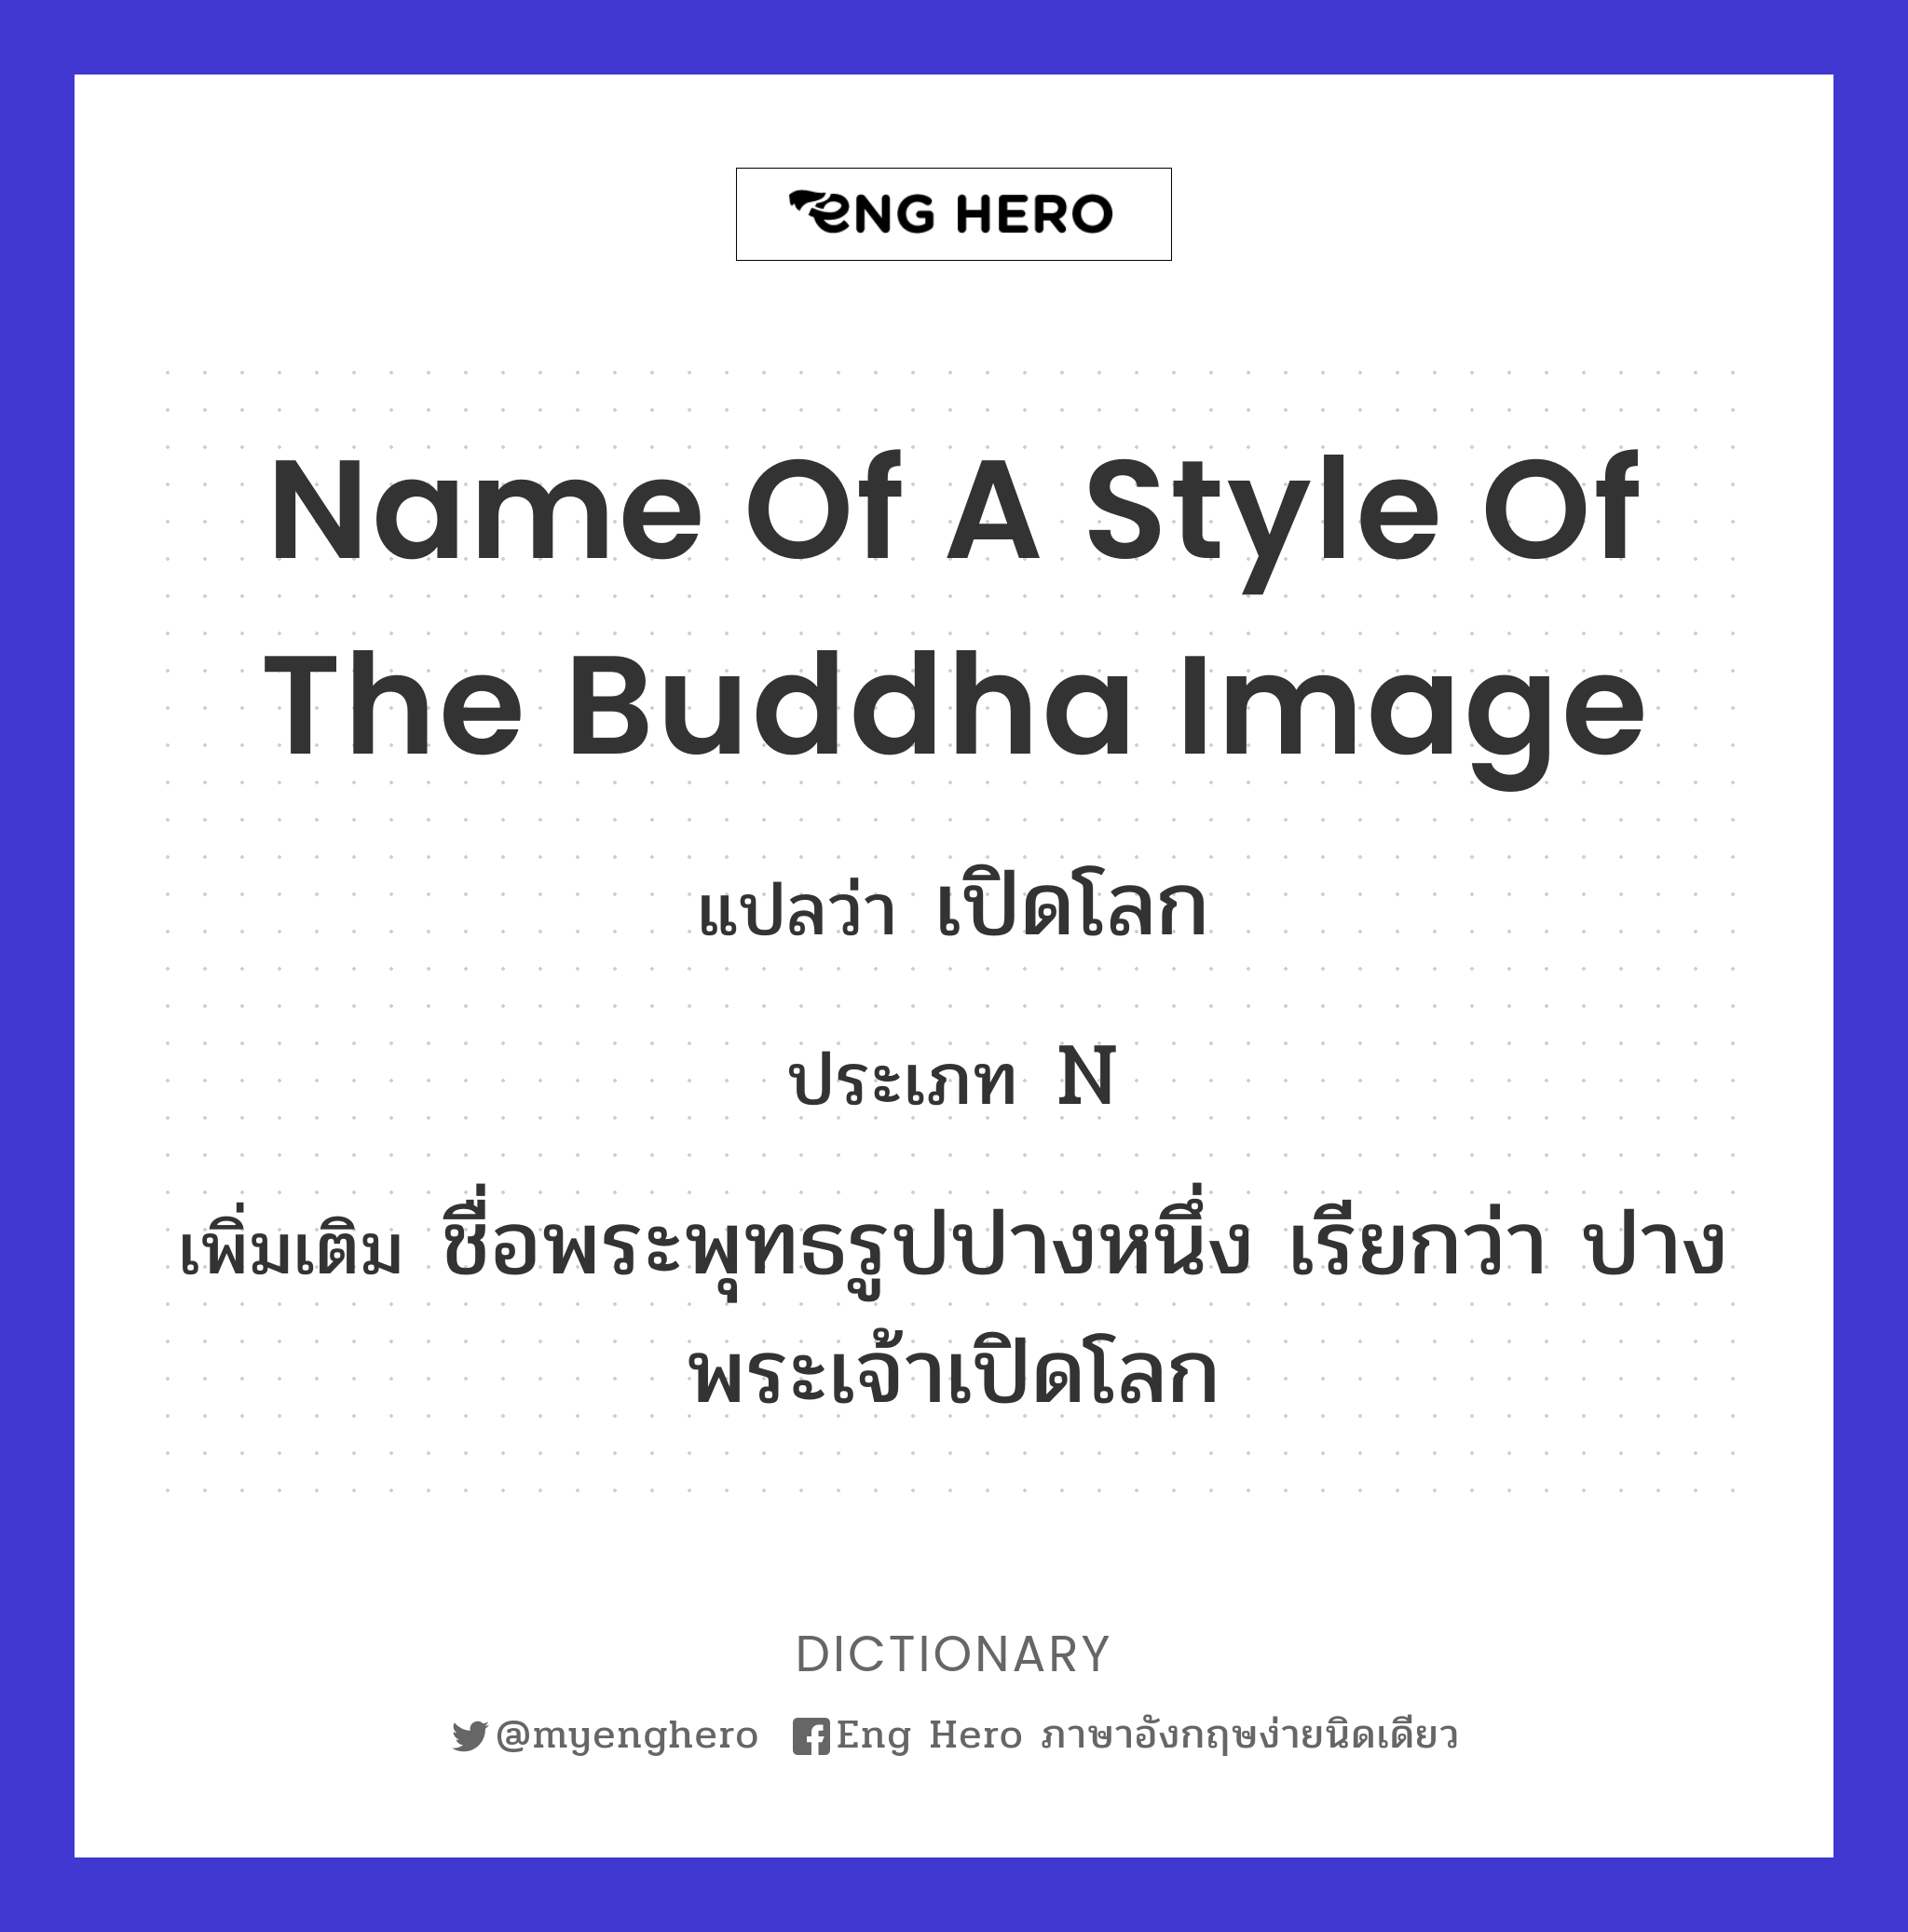 name of a style of the Buddha image